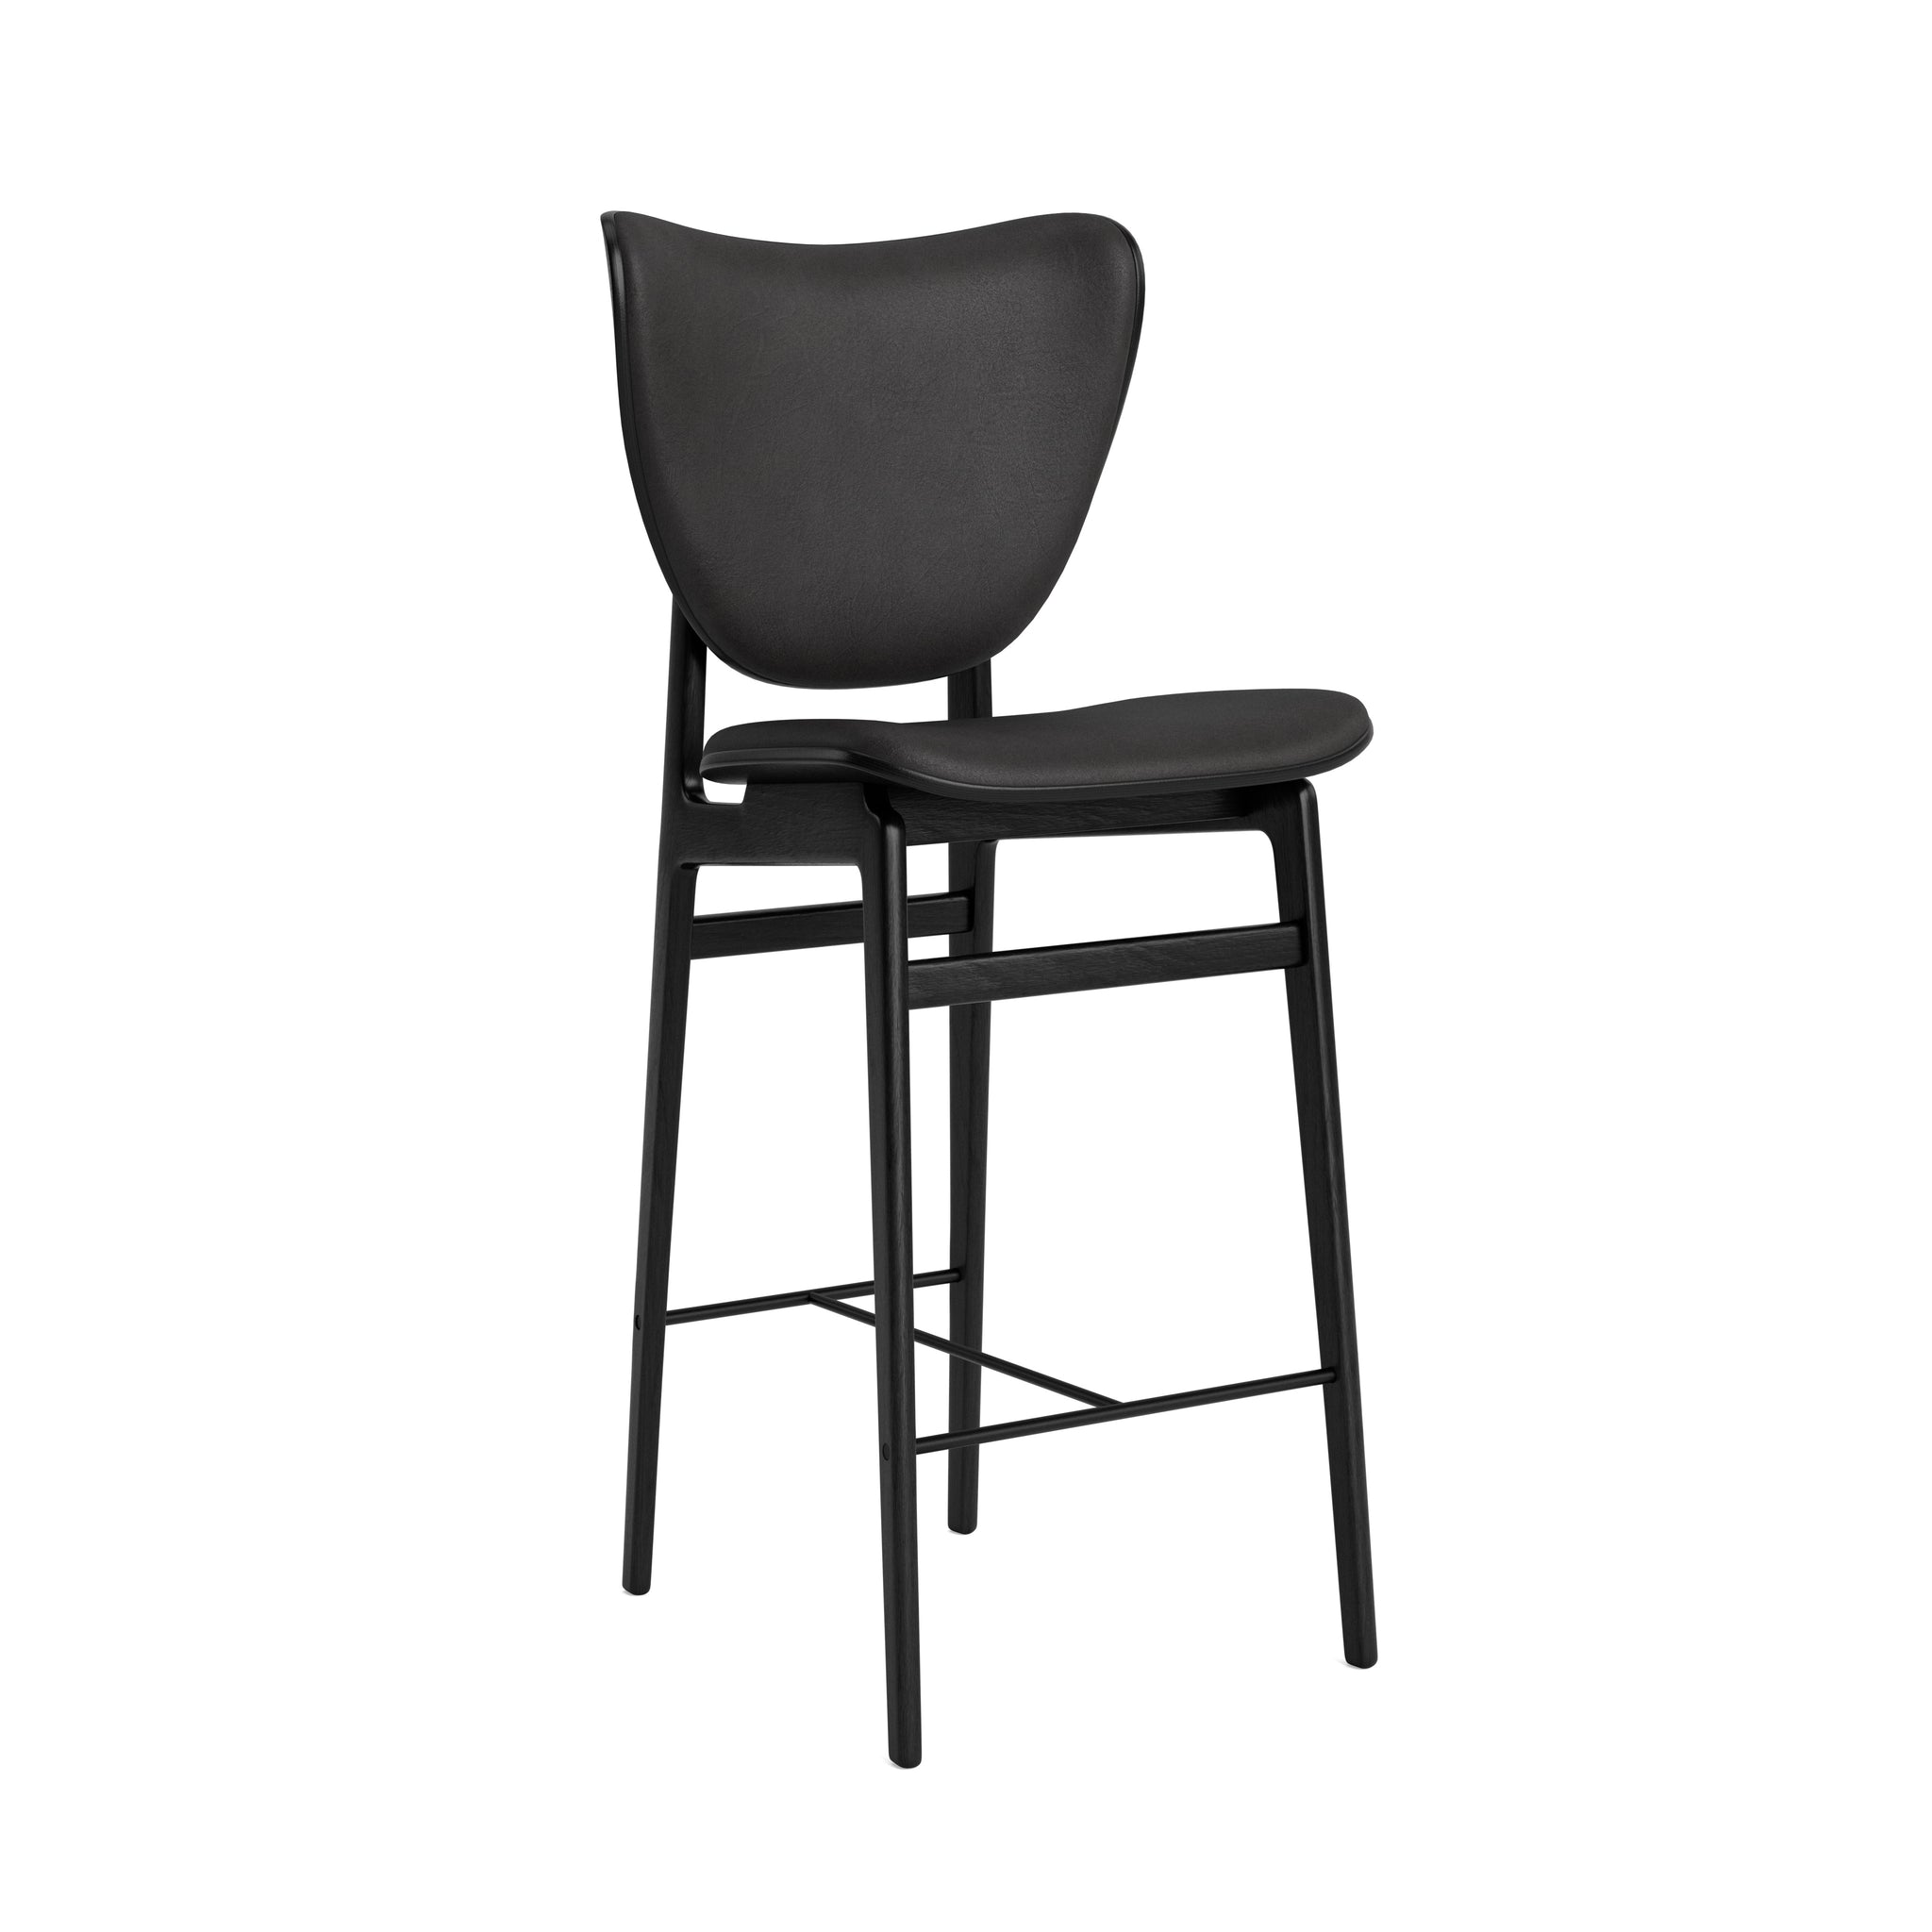 Elephant Bar Chair |  Oak Frame Leather Front Upholstery NORR11